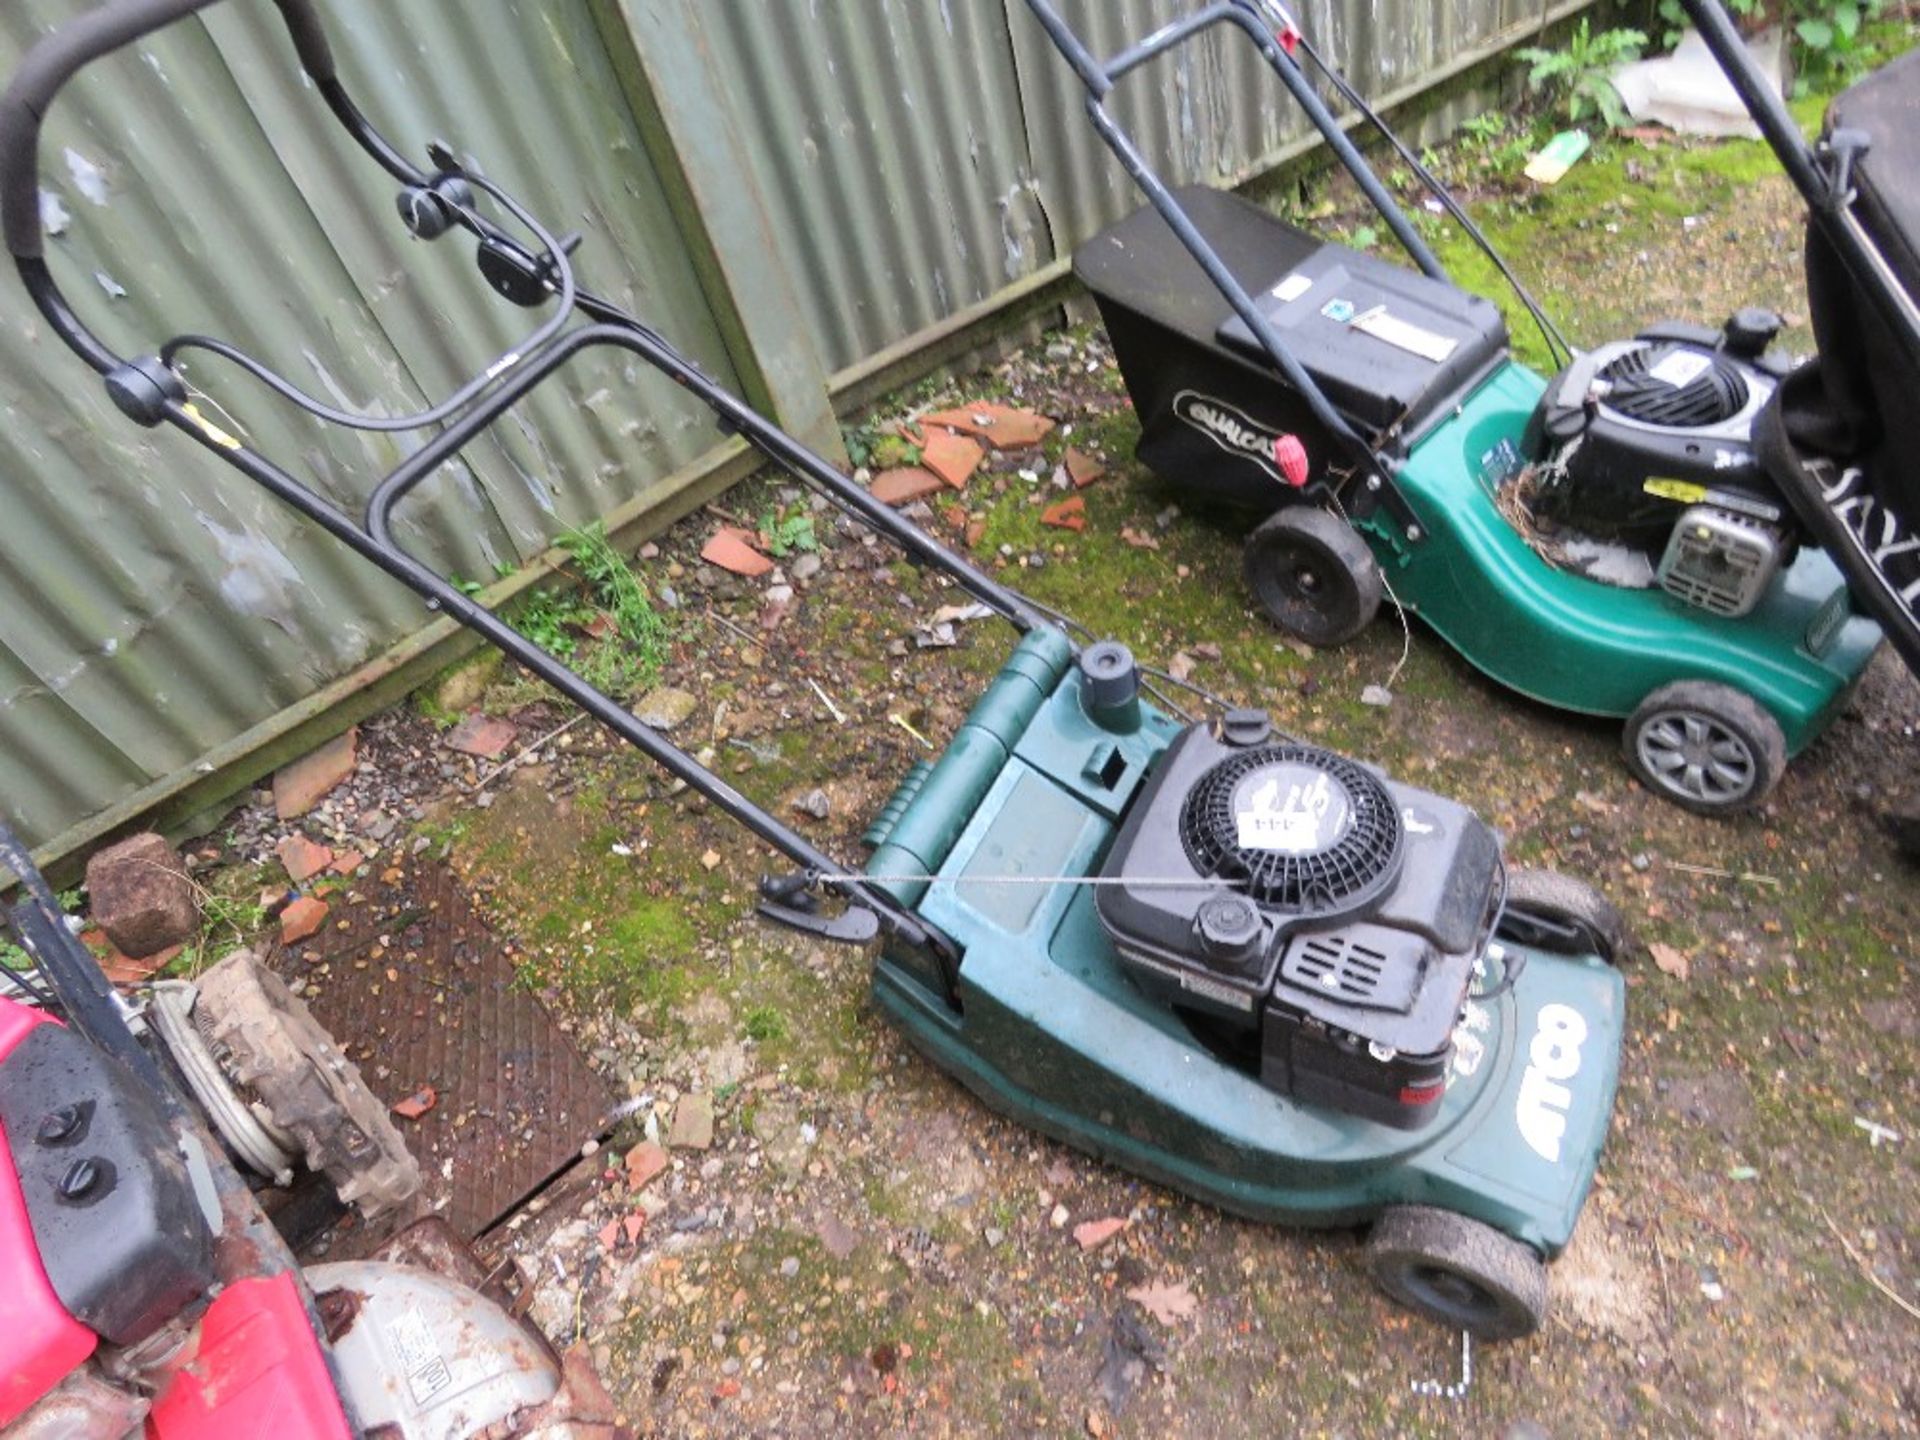 ATCO PETROL ENGINED ROLLER LAWNMOWER , NO COLLECTOR. THIS LOT IS SOLD UNDER THE AUCTIONEERS MARGIN